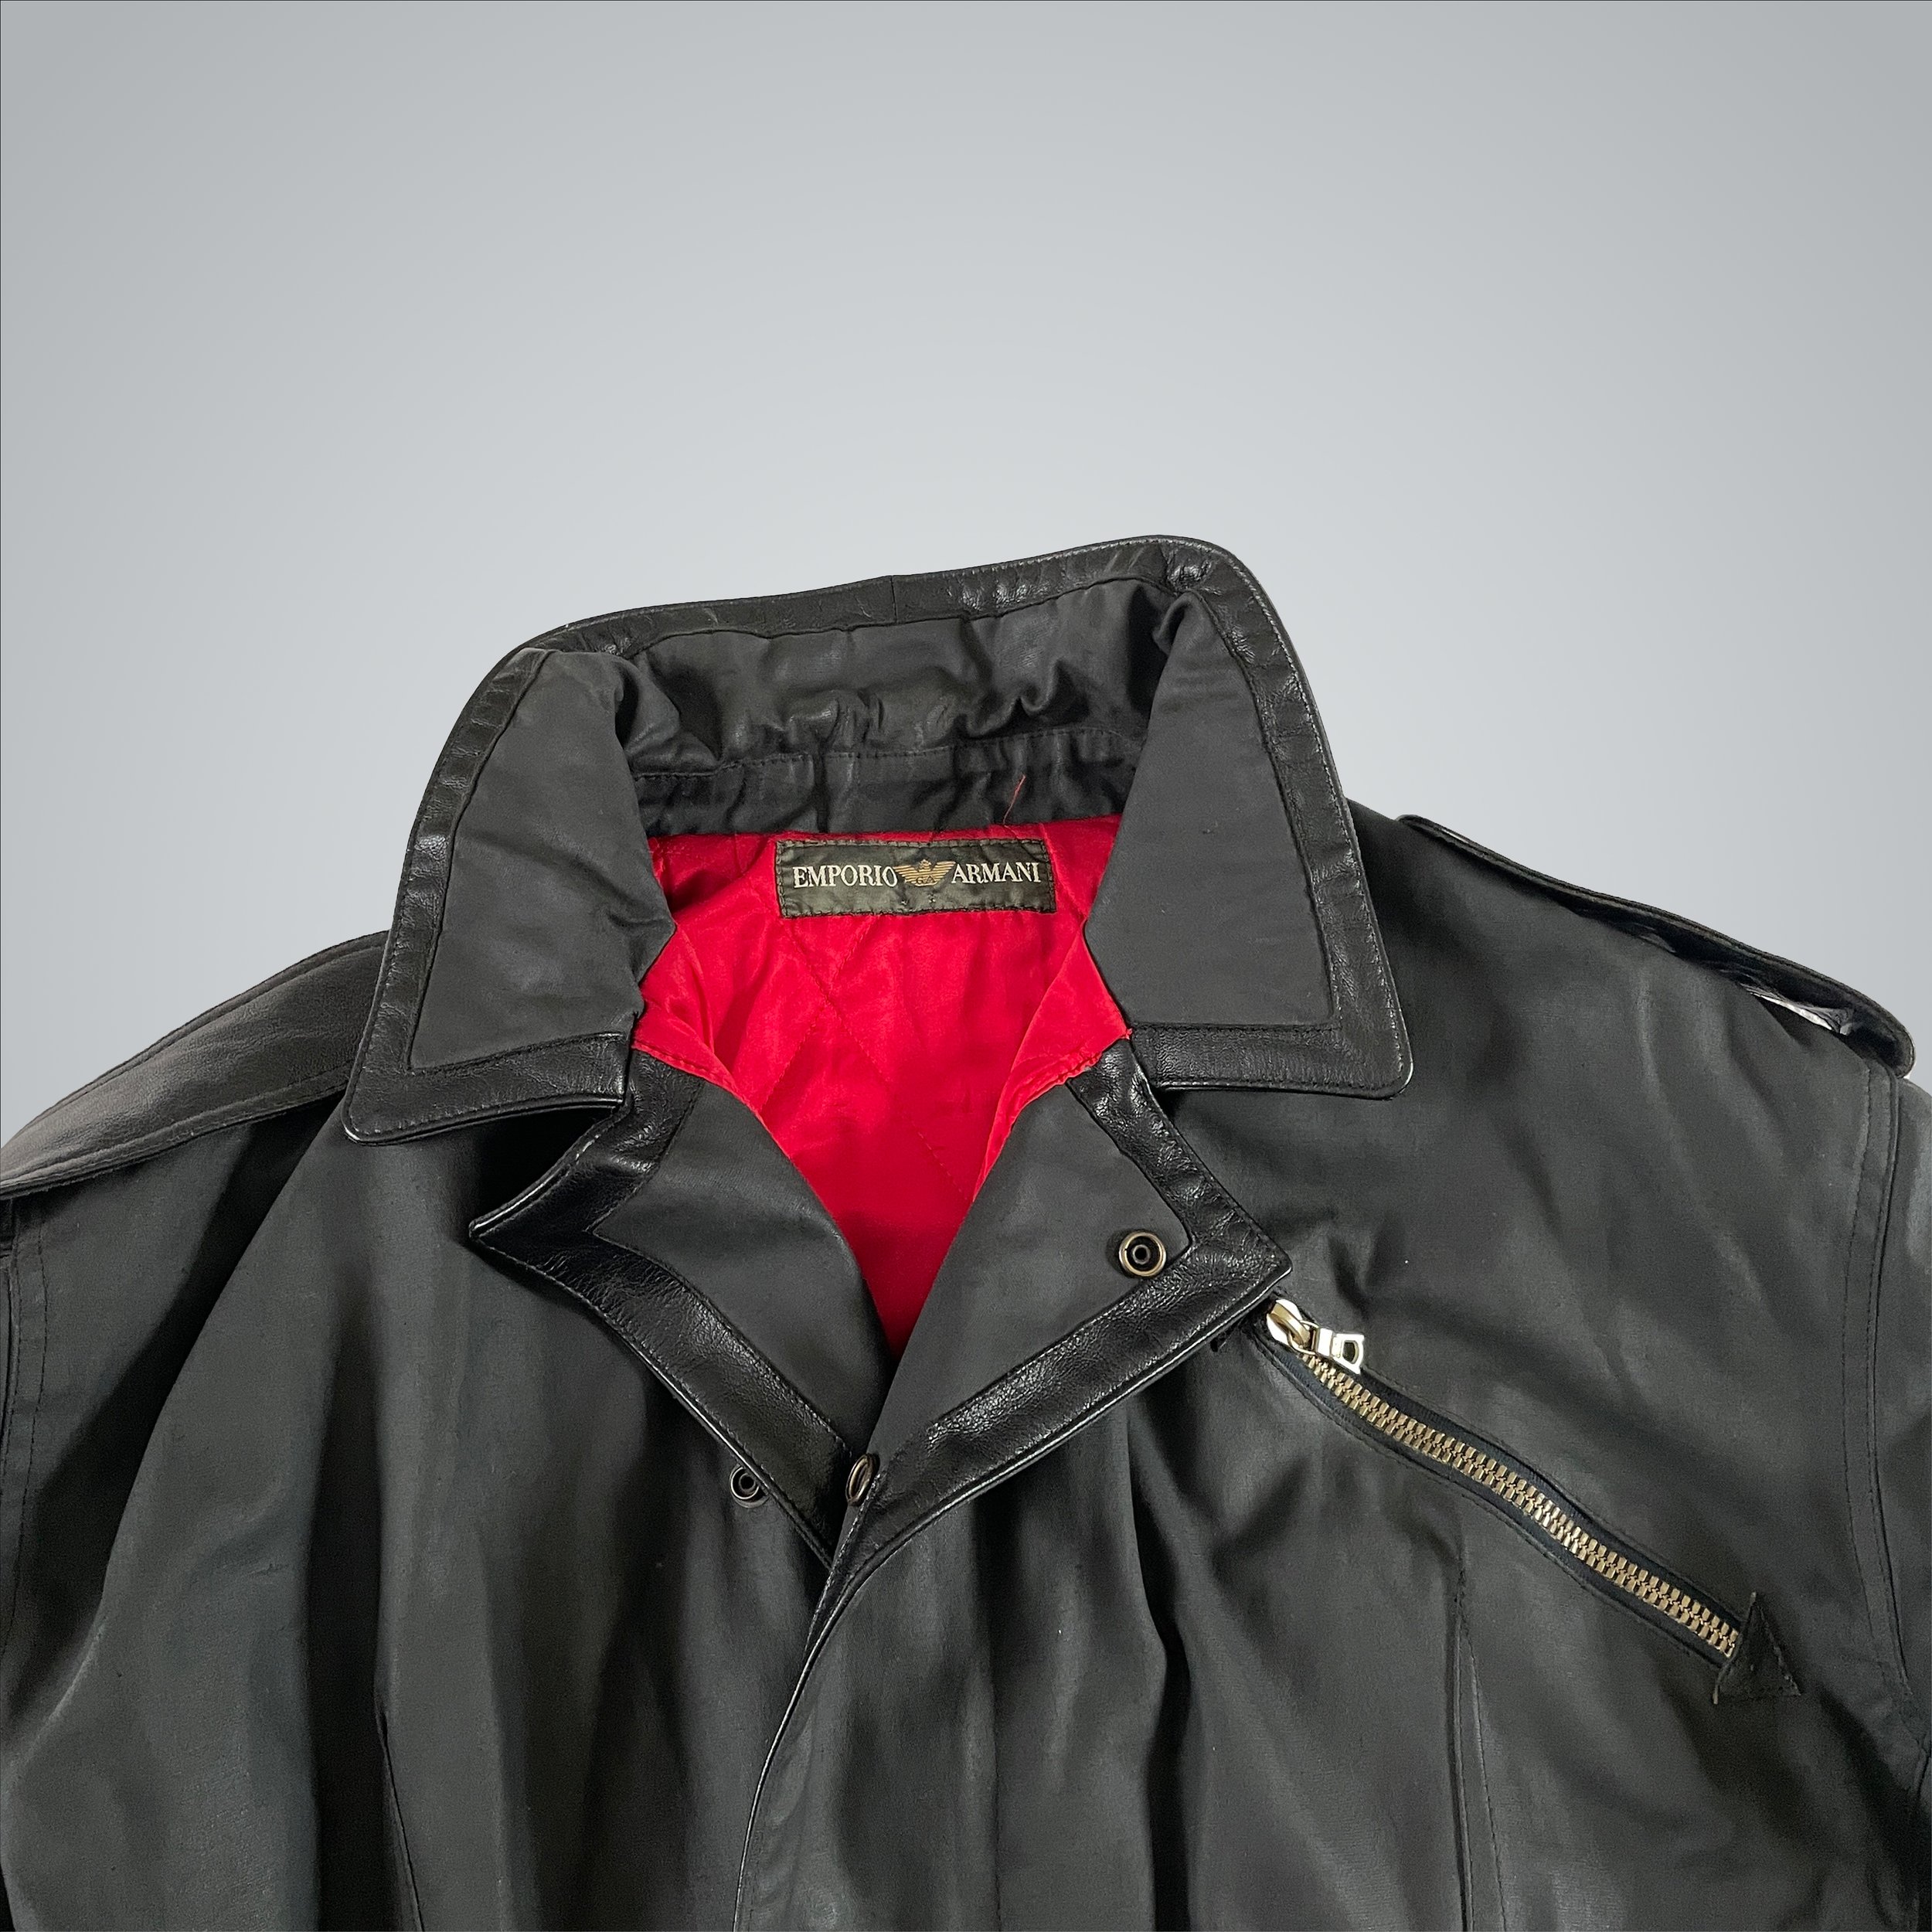 Emporio Armani Motorcycle Jacket with Leather details s